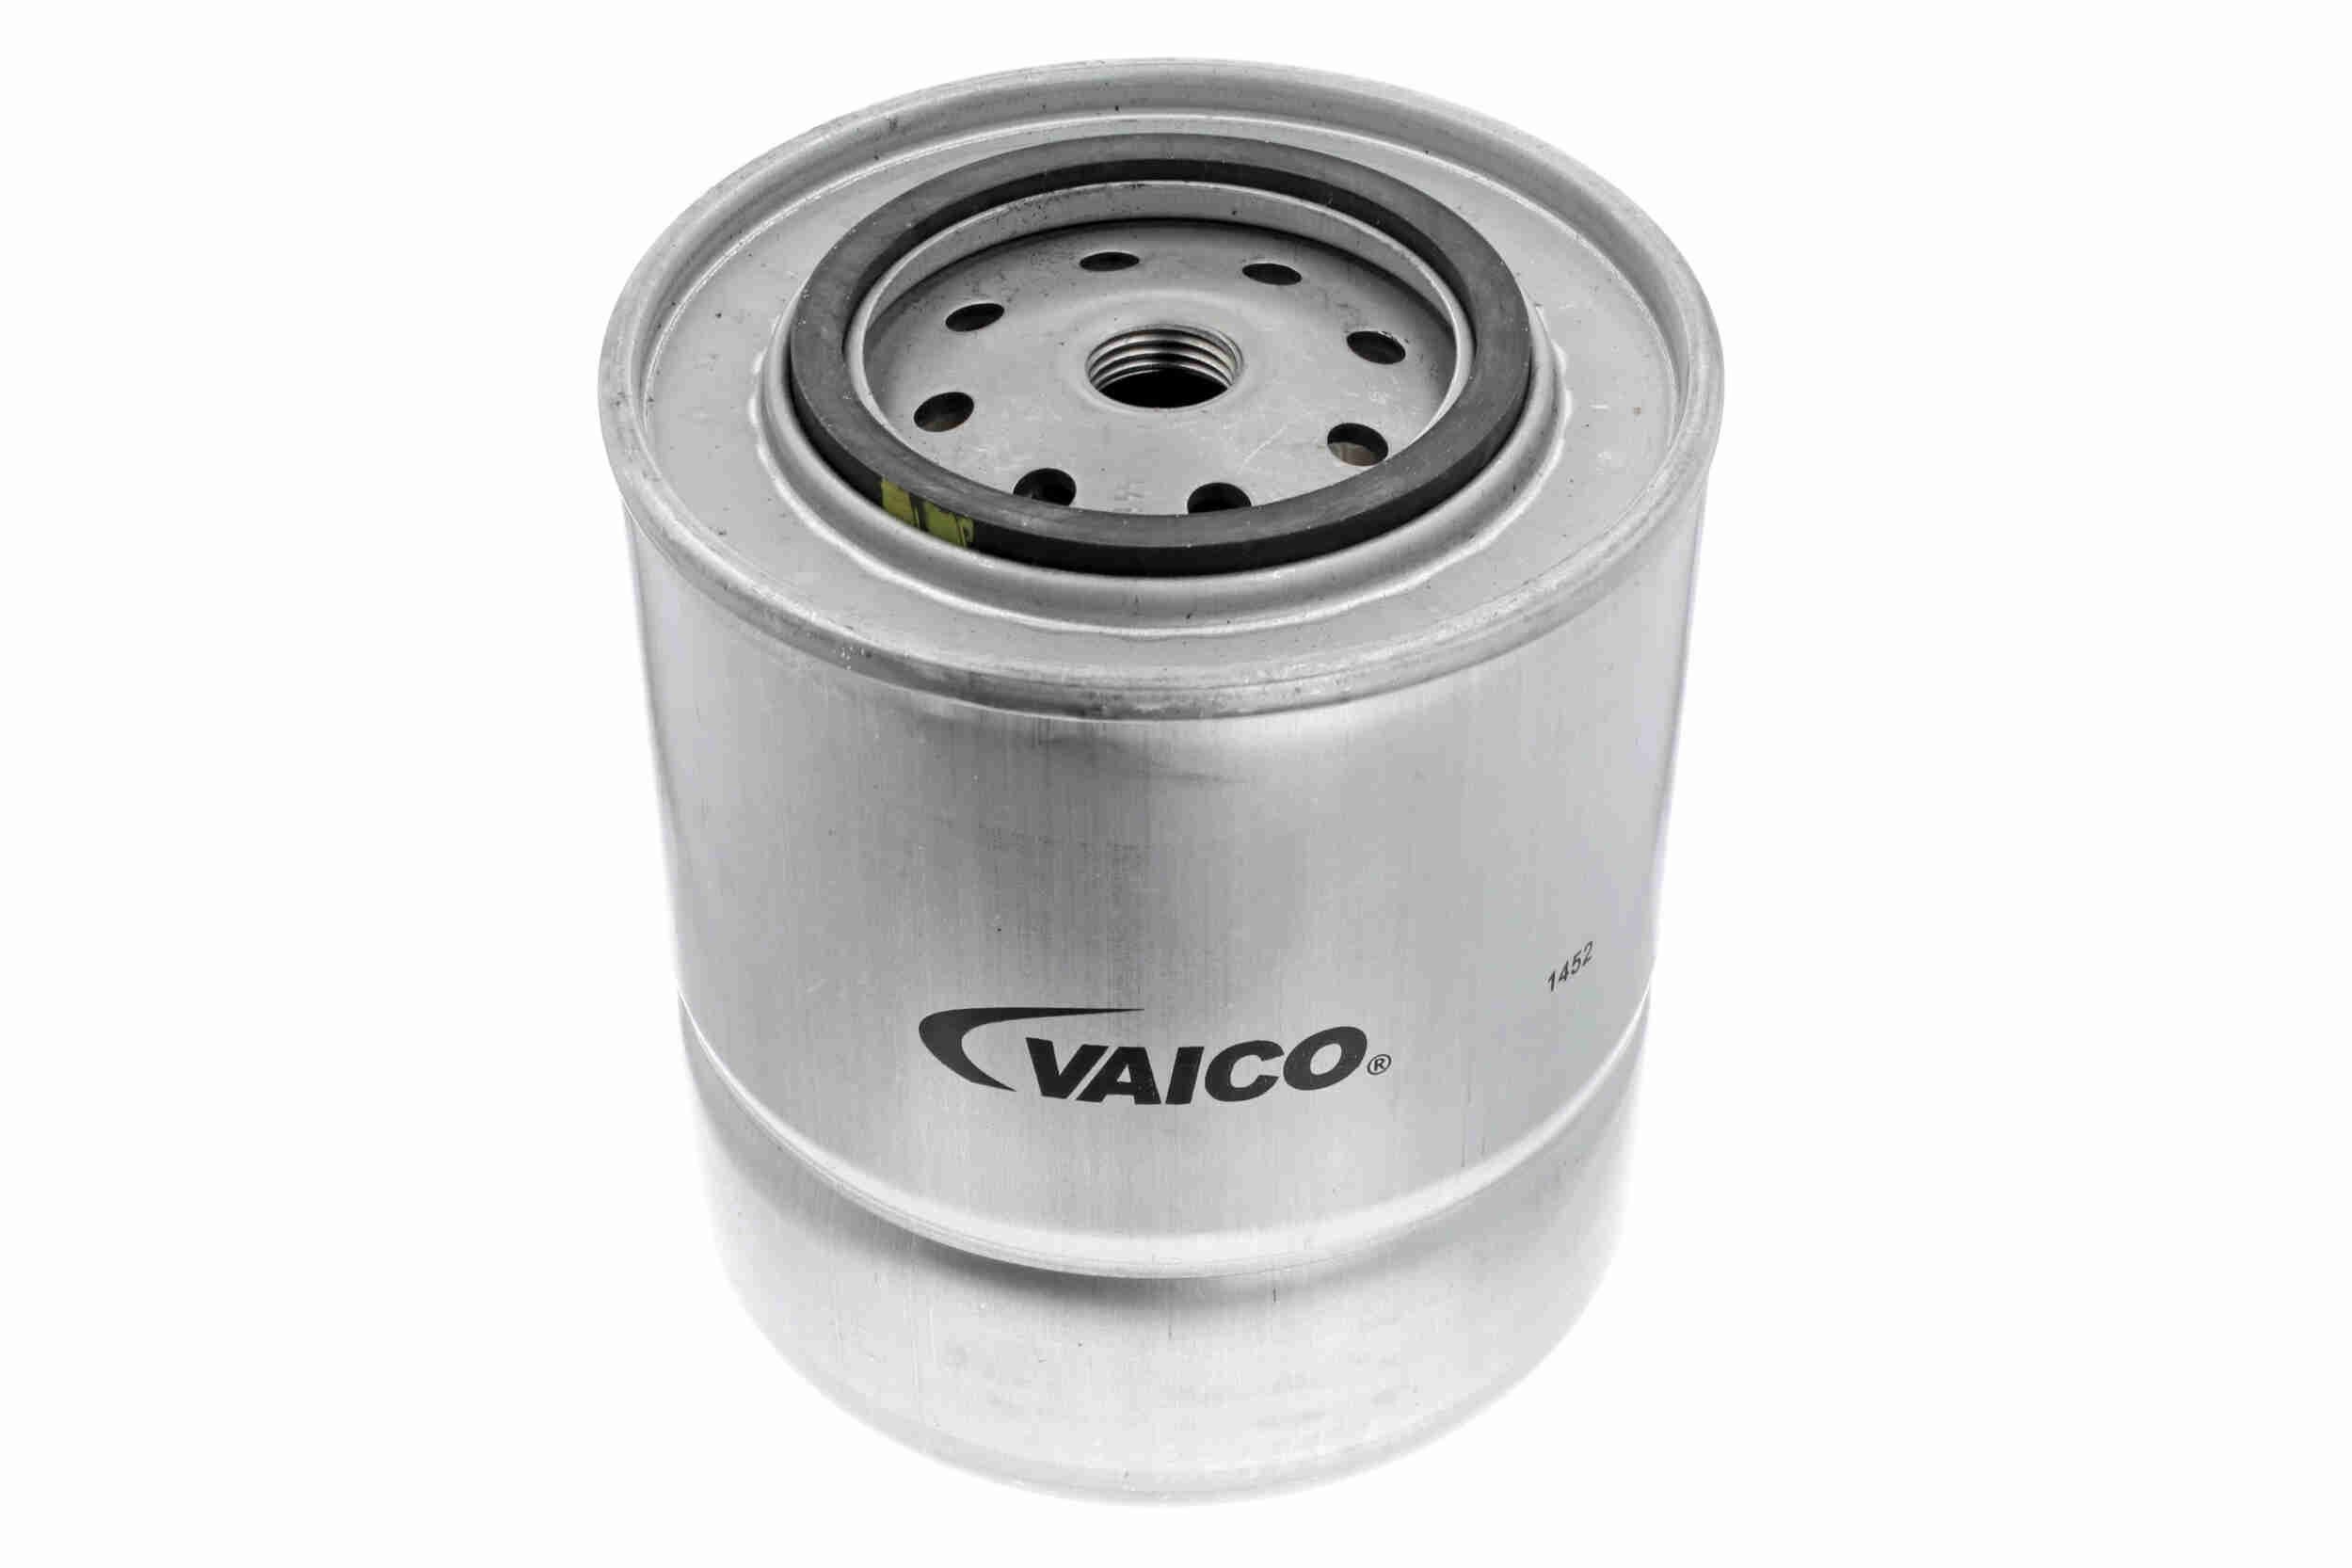 VAICO Inline fuel filter diesel and petrol BMW E30 Touring new V20-0629